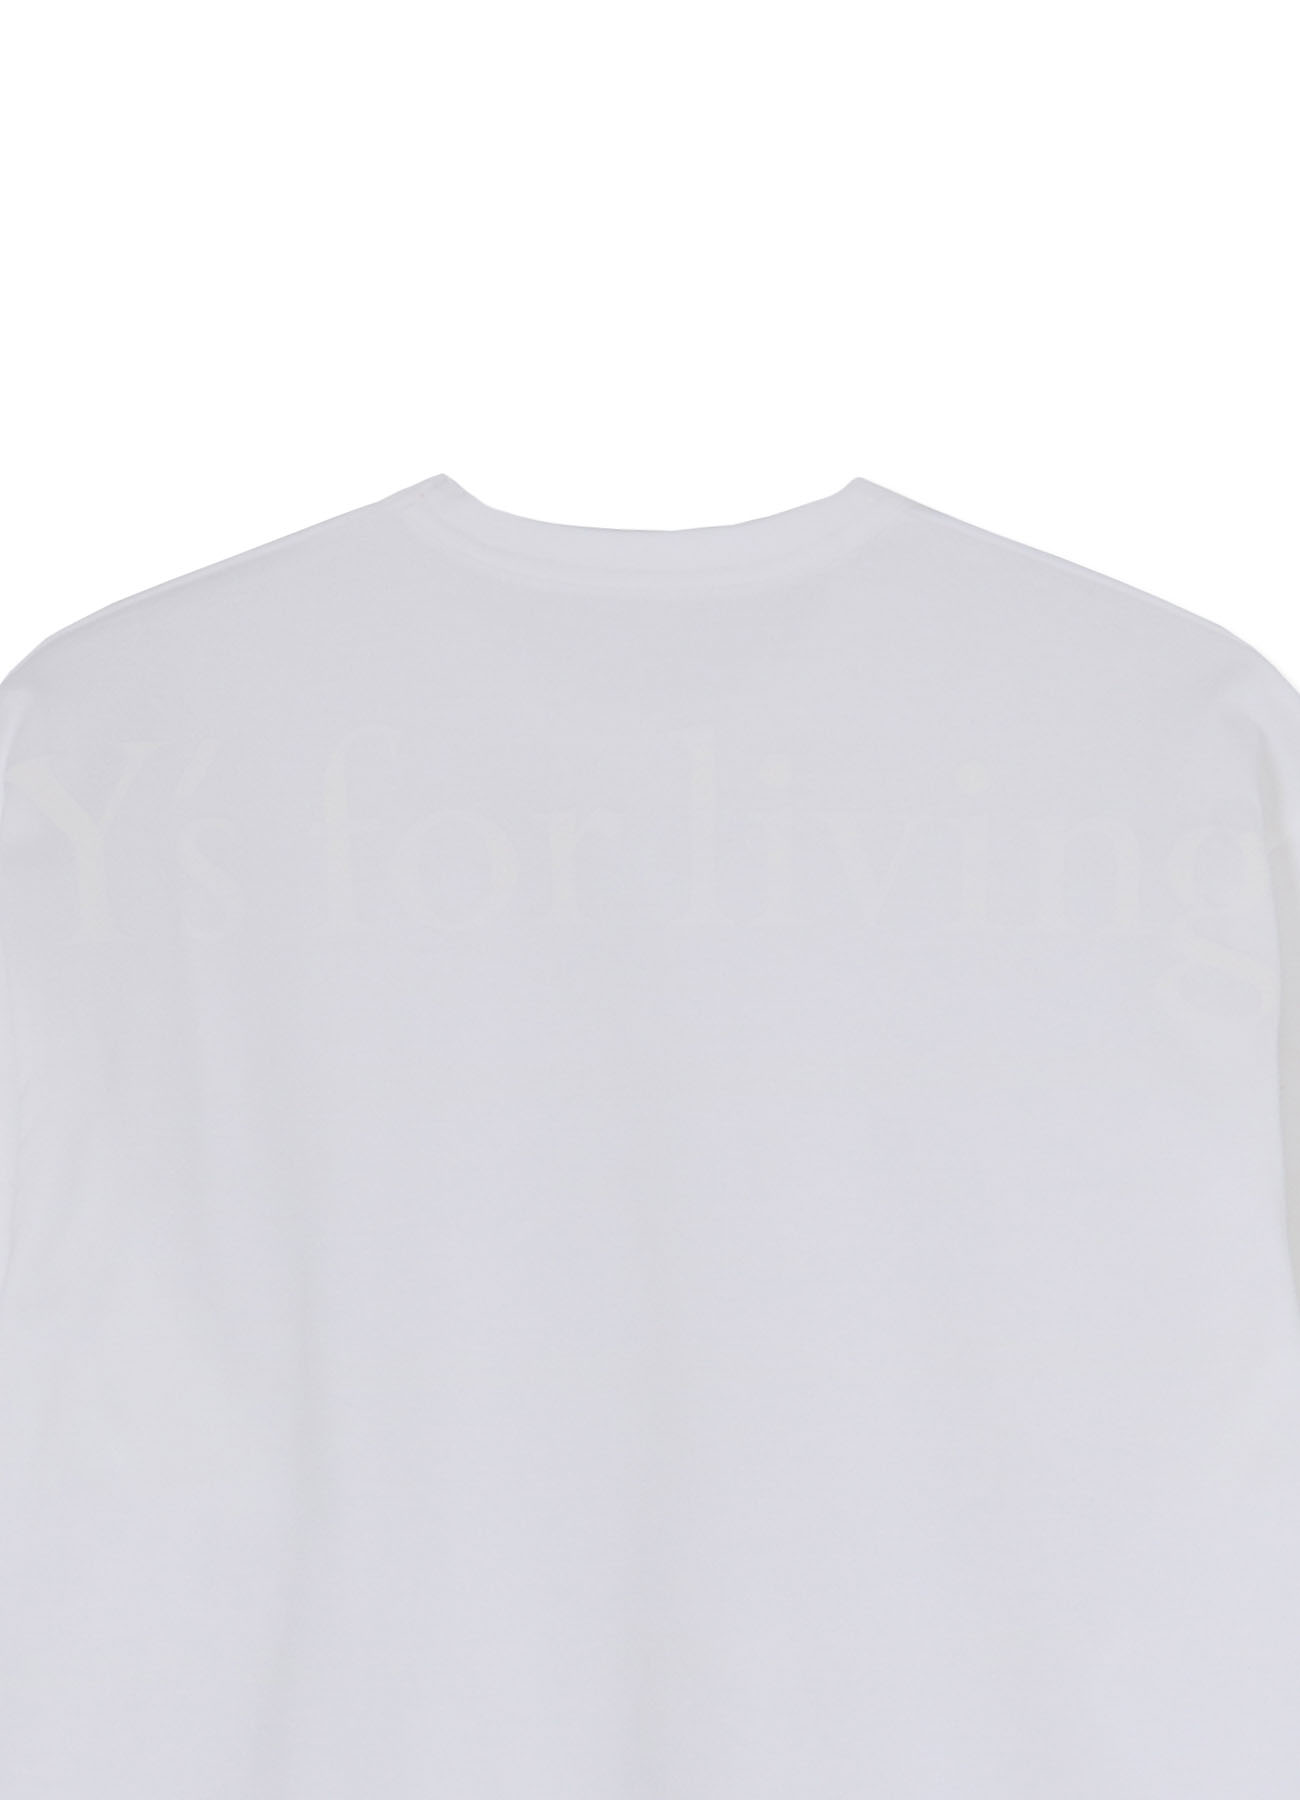 40/2 COTTON JERSEY LONG SLEEVE SHIRT (M)(M White): Y's for living